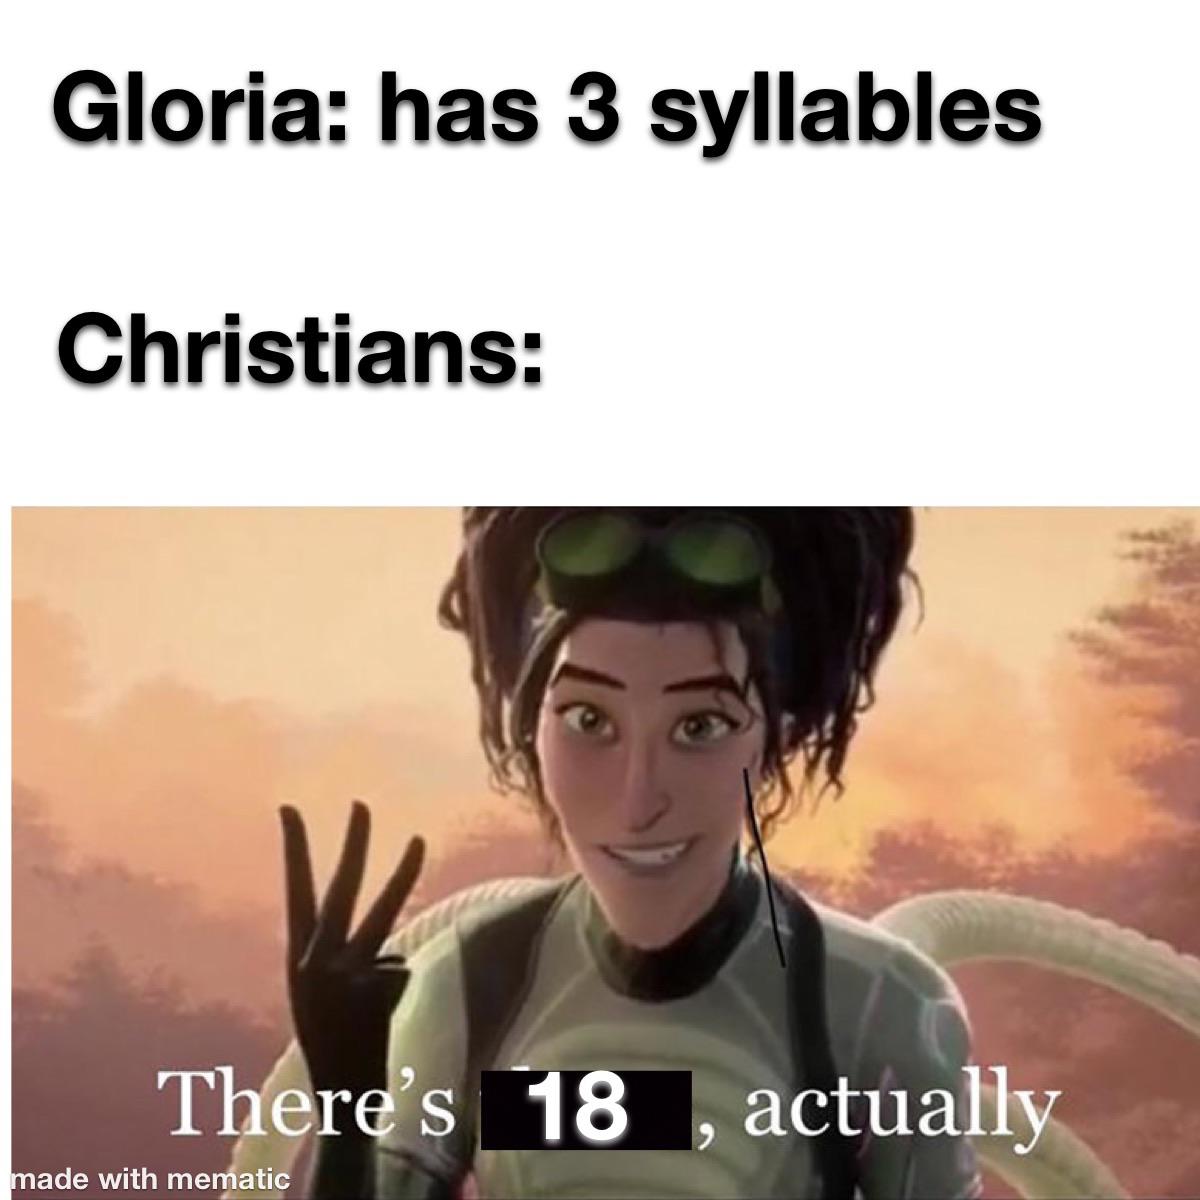 Christian, Glooooooooooooooooooooooooria Christian Memes Christian, Glooooooooooooooooooooooooria text: Gloria: has 3 syllables Christians: T r 's 18 ade with me ati actually 